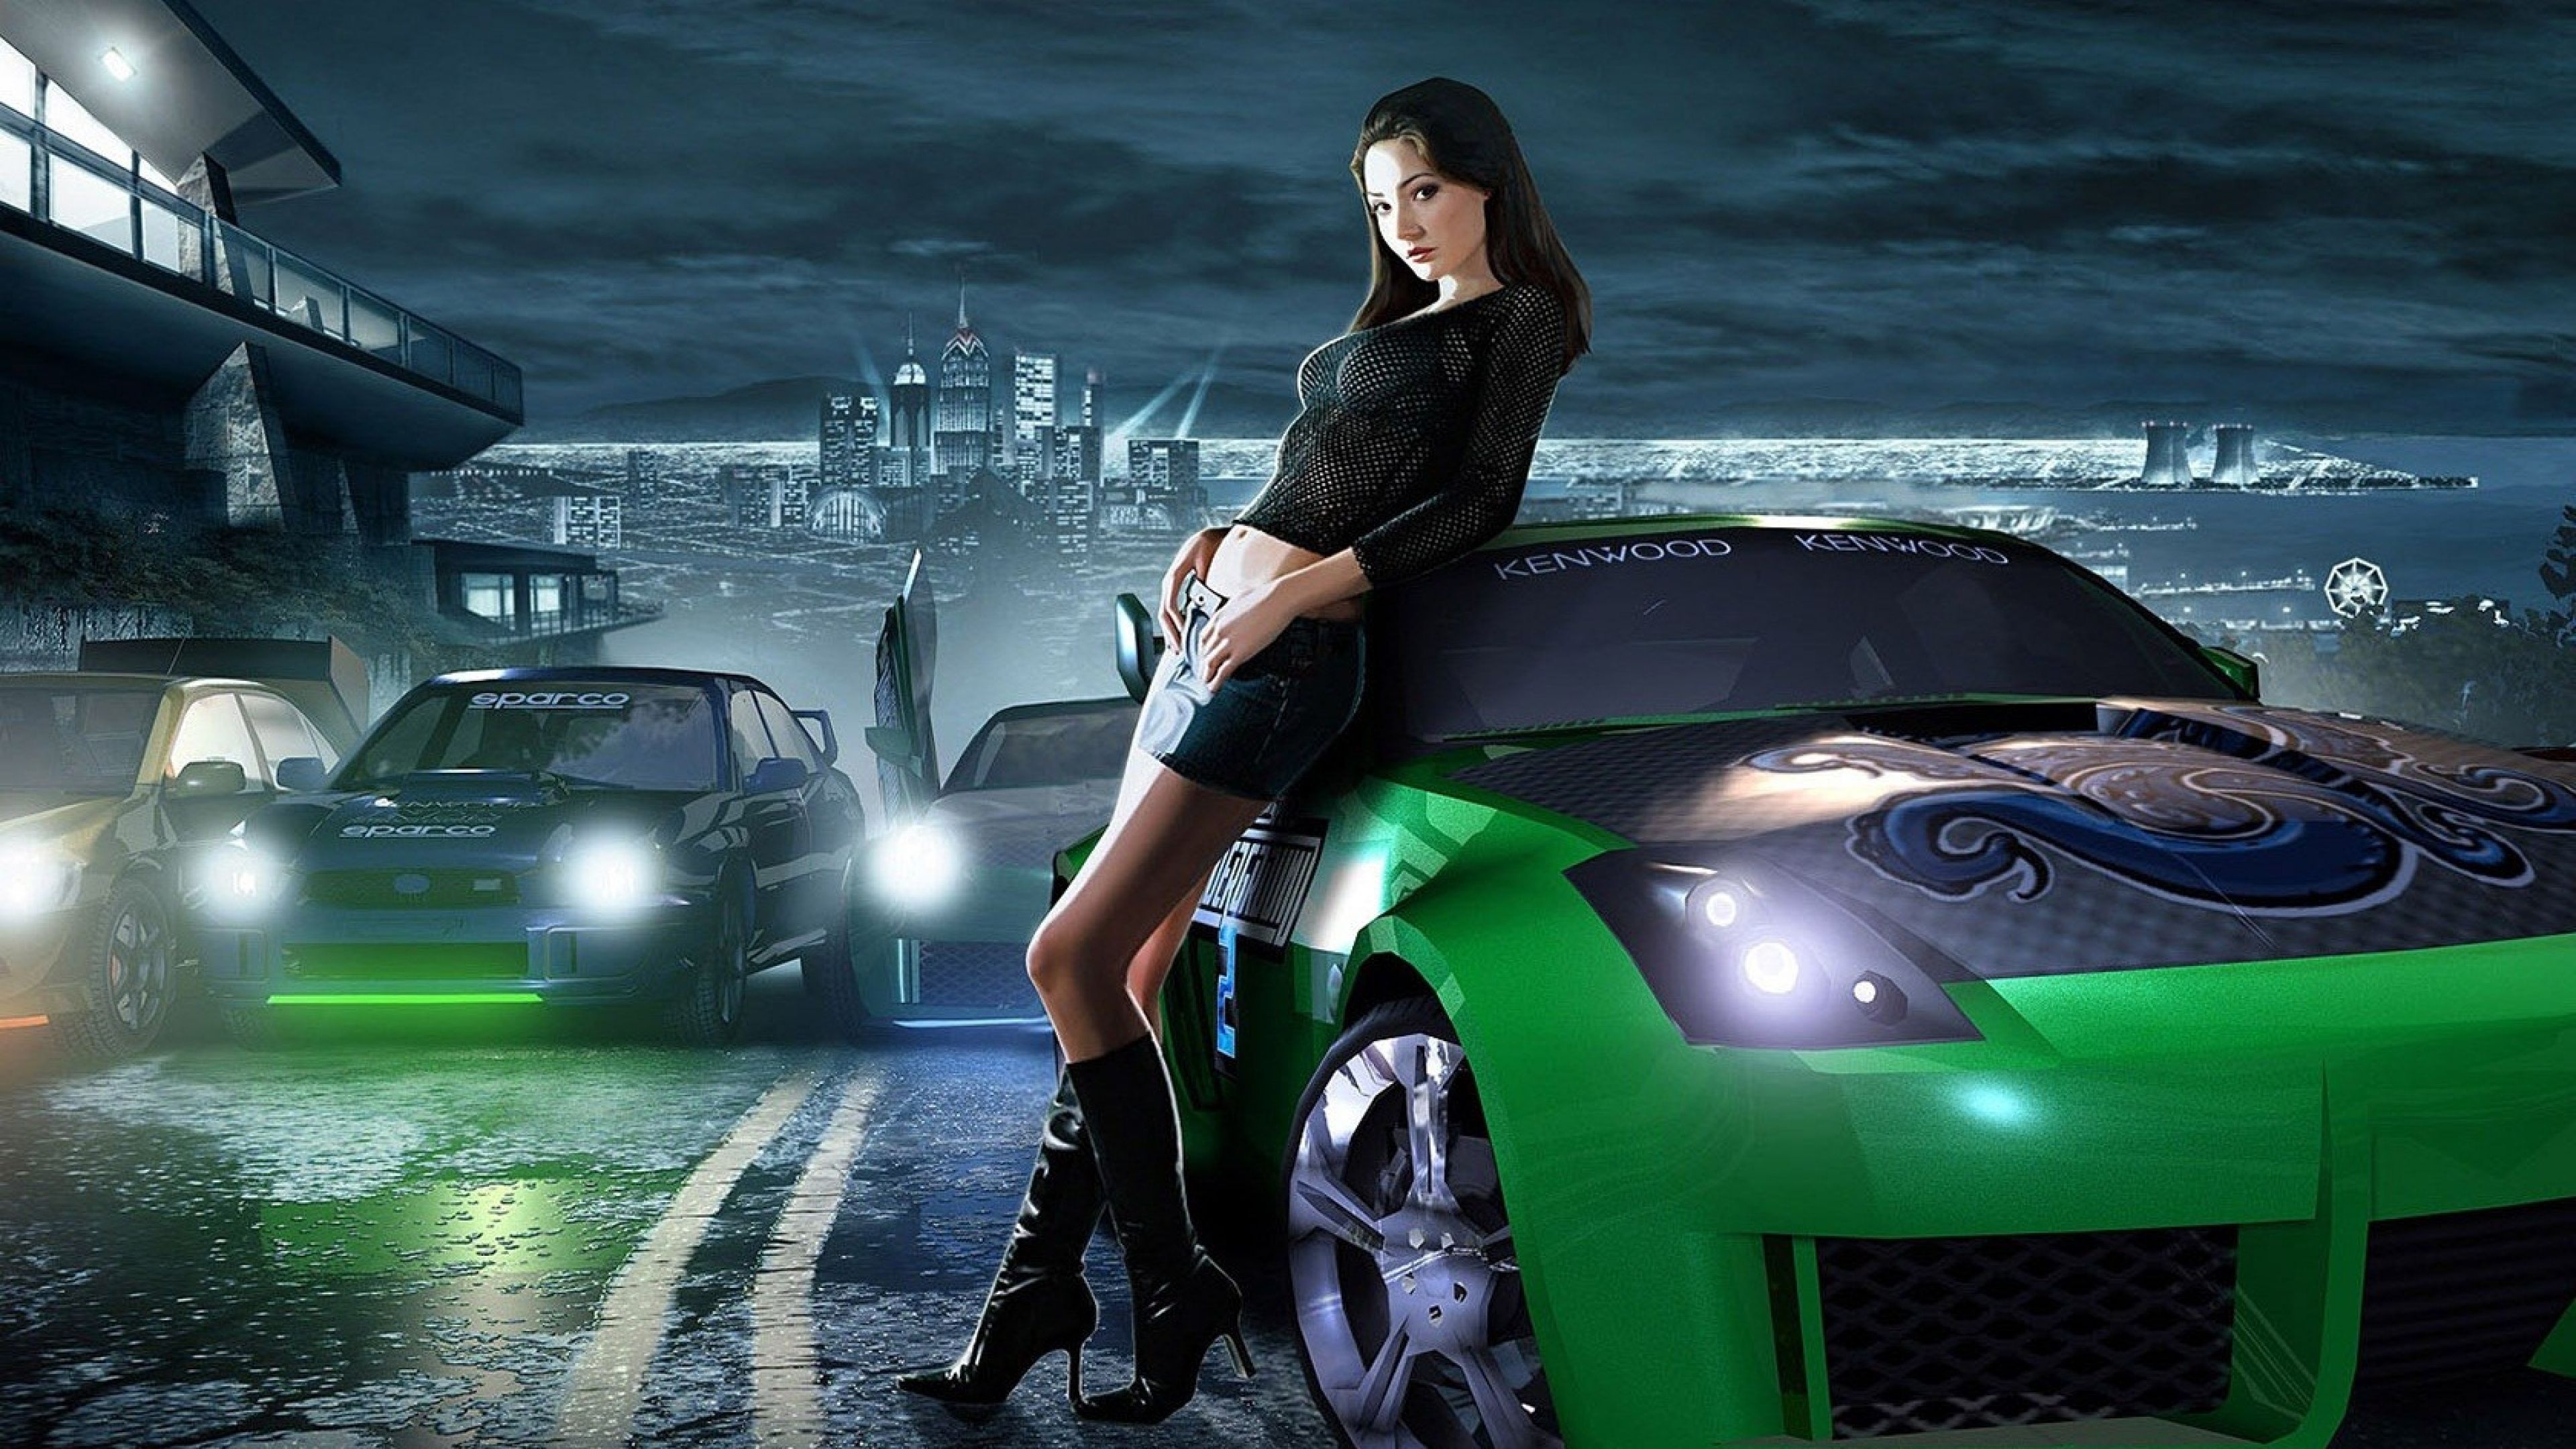 Download Wallpaper 3840x2160 Nfs, Need for speed, Girl, Car, City ...